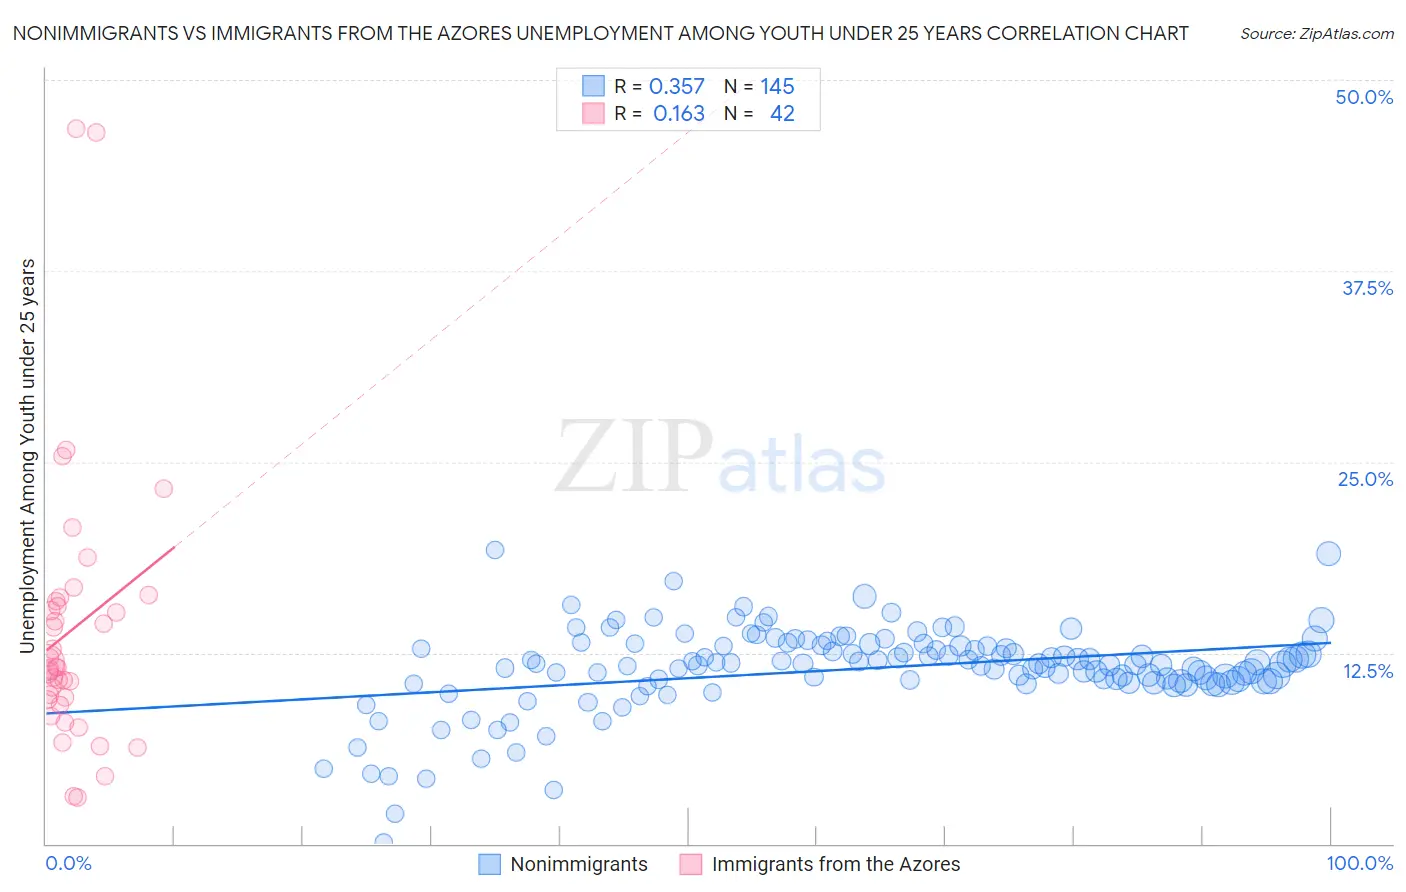 Nonimmigrants vs Immigrants from the Azores Unemployment Among Youth under 25 years